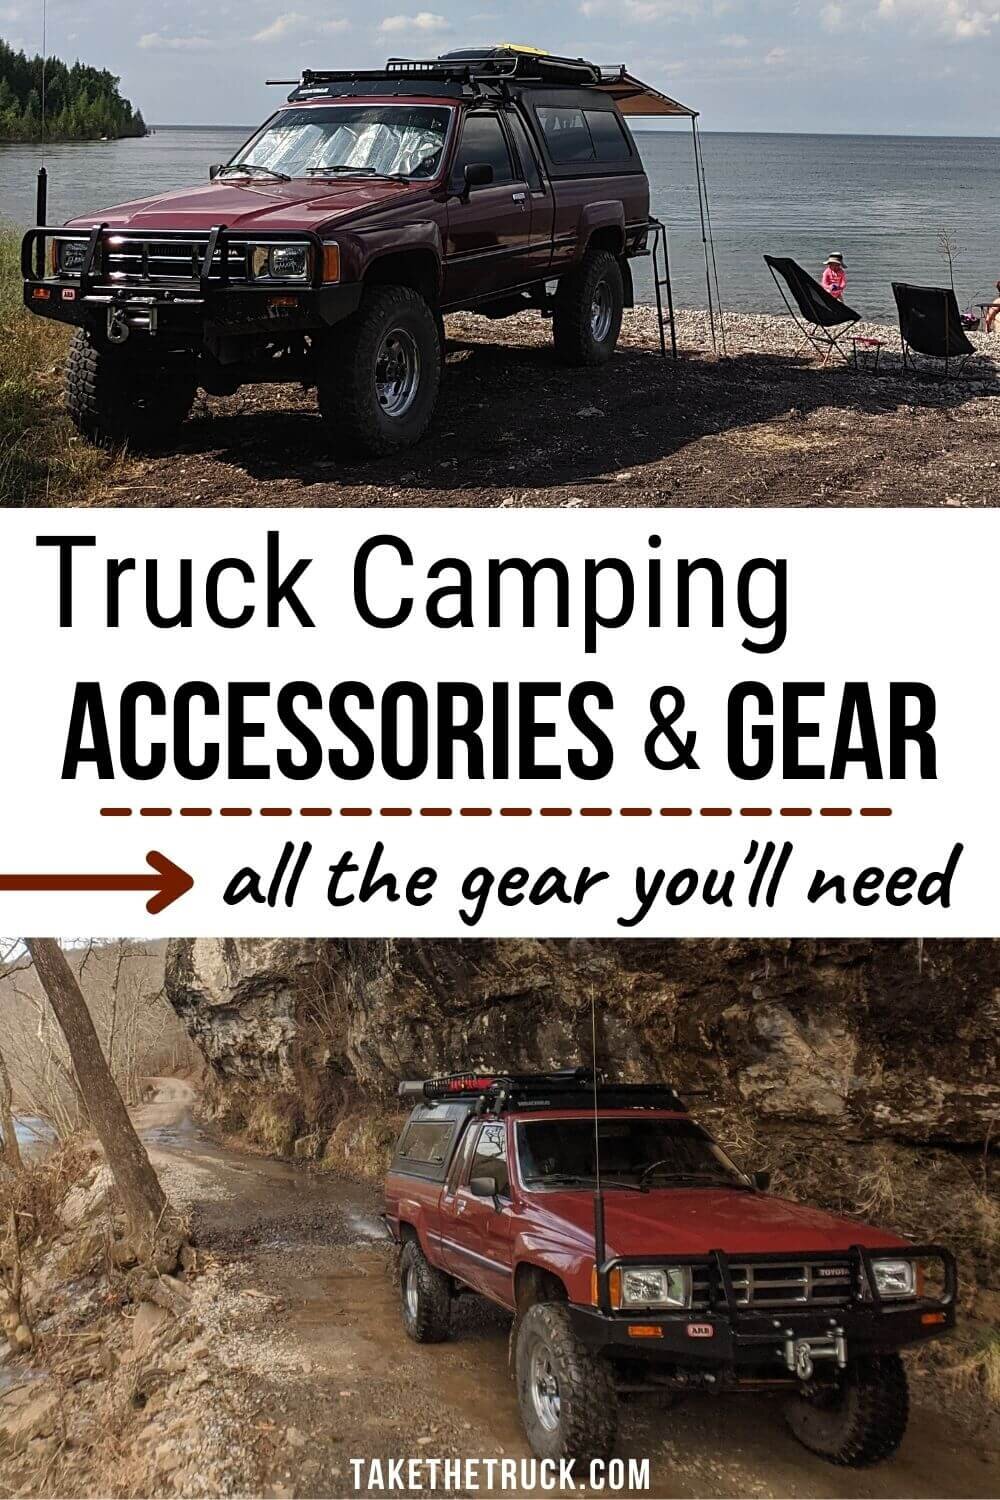 Check out our gear page to see what truck camping accessories and overlanding gear we use and love after years of experience with wild camping and traveling from our truck bed camper.